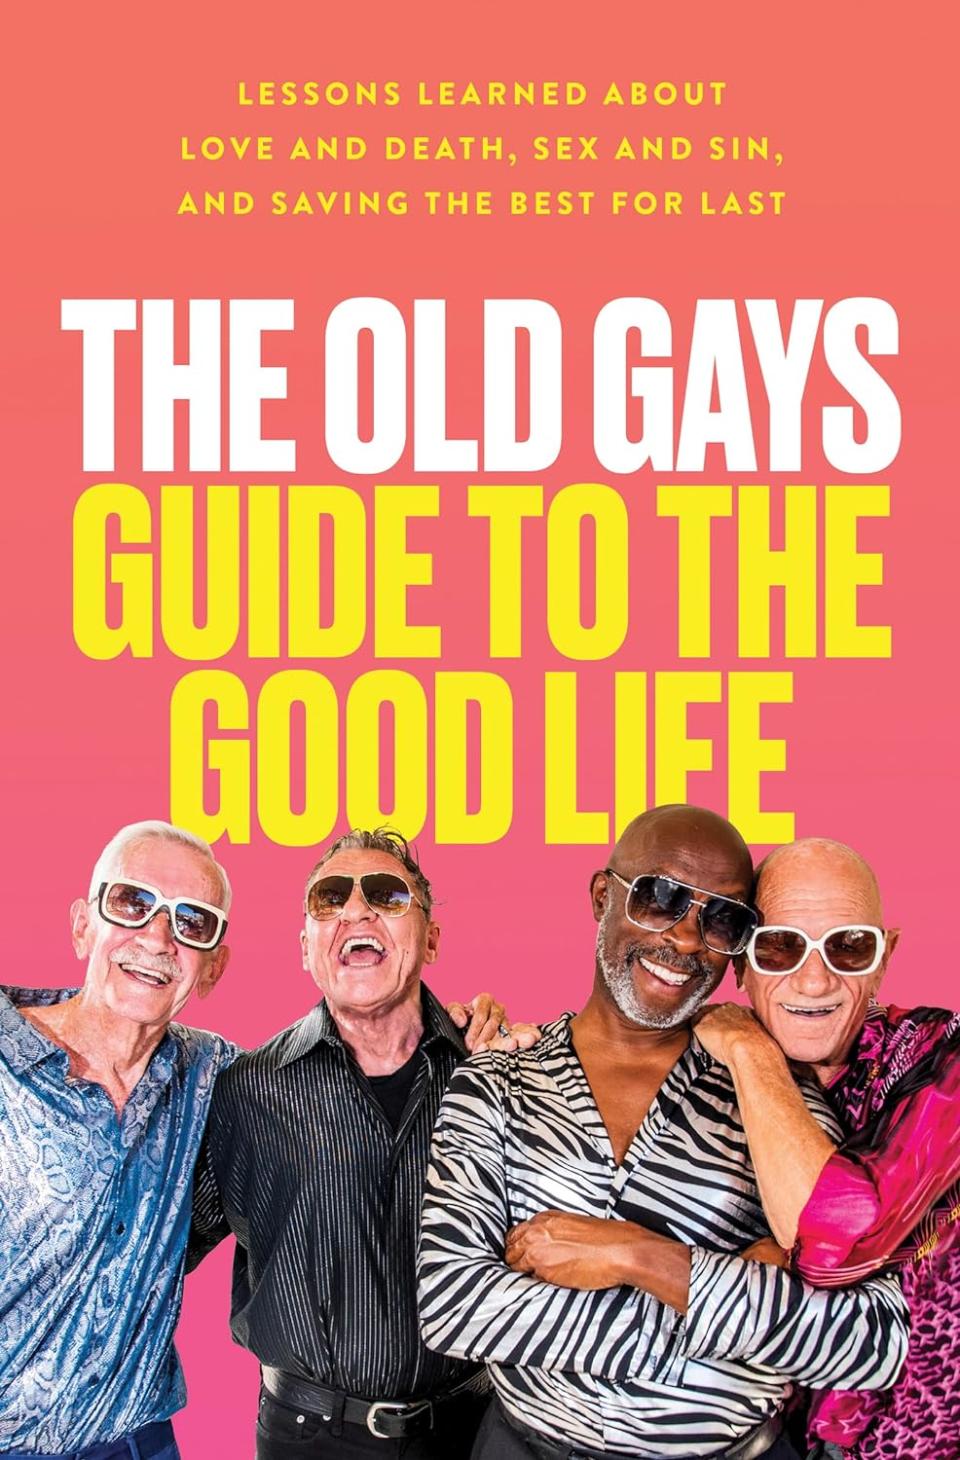 "The Old Gays Guide to the Good Life: Lessons Learned About Love and Death, Sex and Sin, and Saving the Best for Last" was written by local TikTok sensations Mick Peterson, Bill Lyons, Robert Reeves and Jessay Martin.